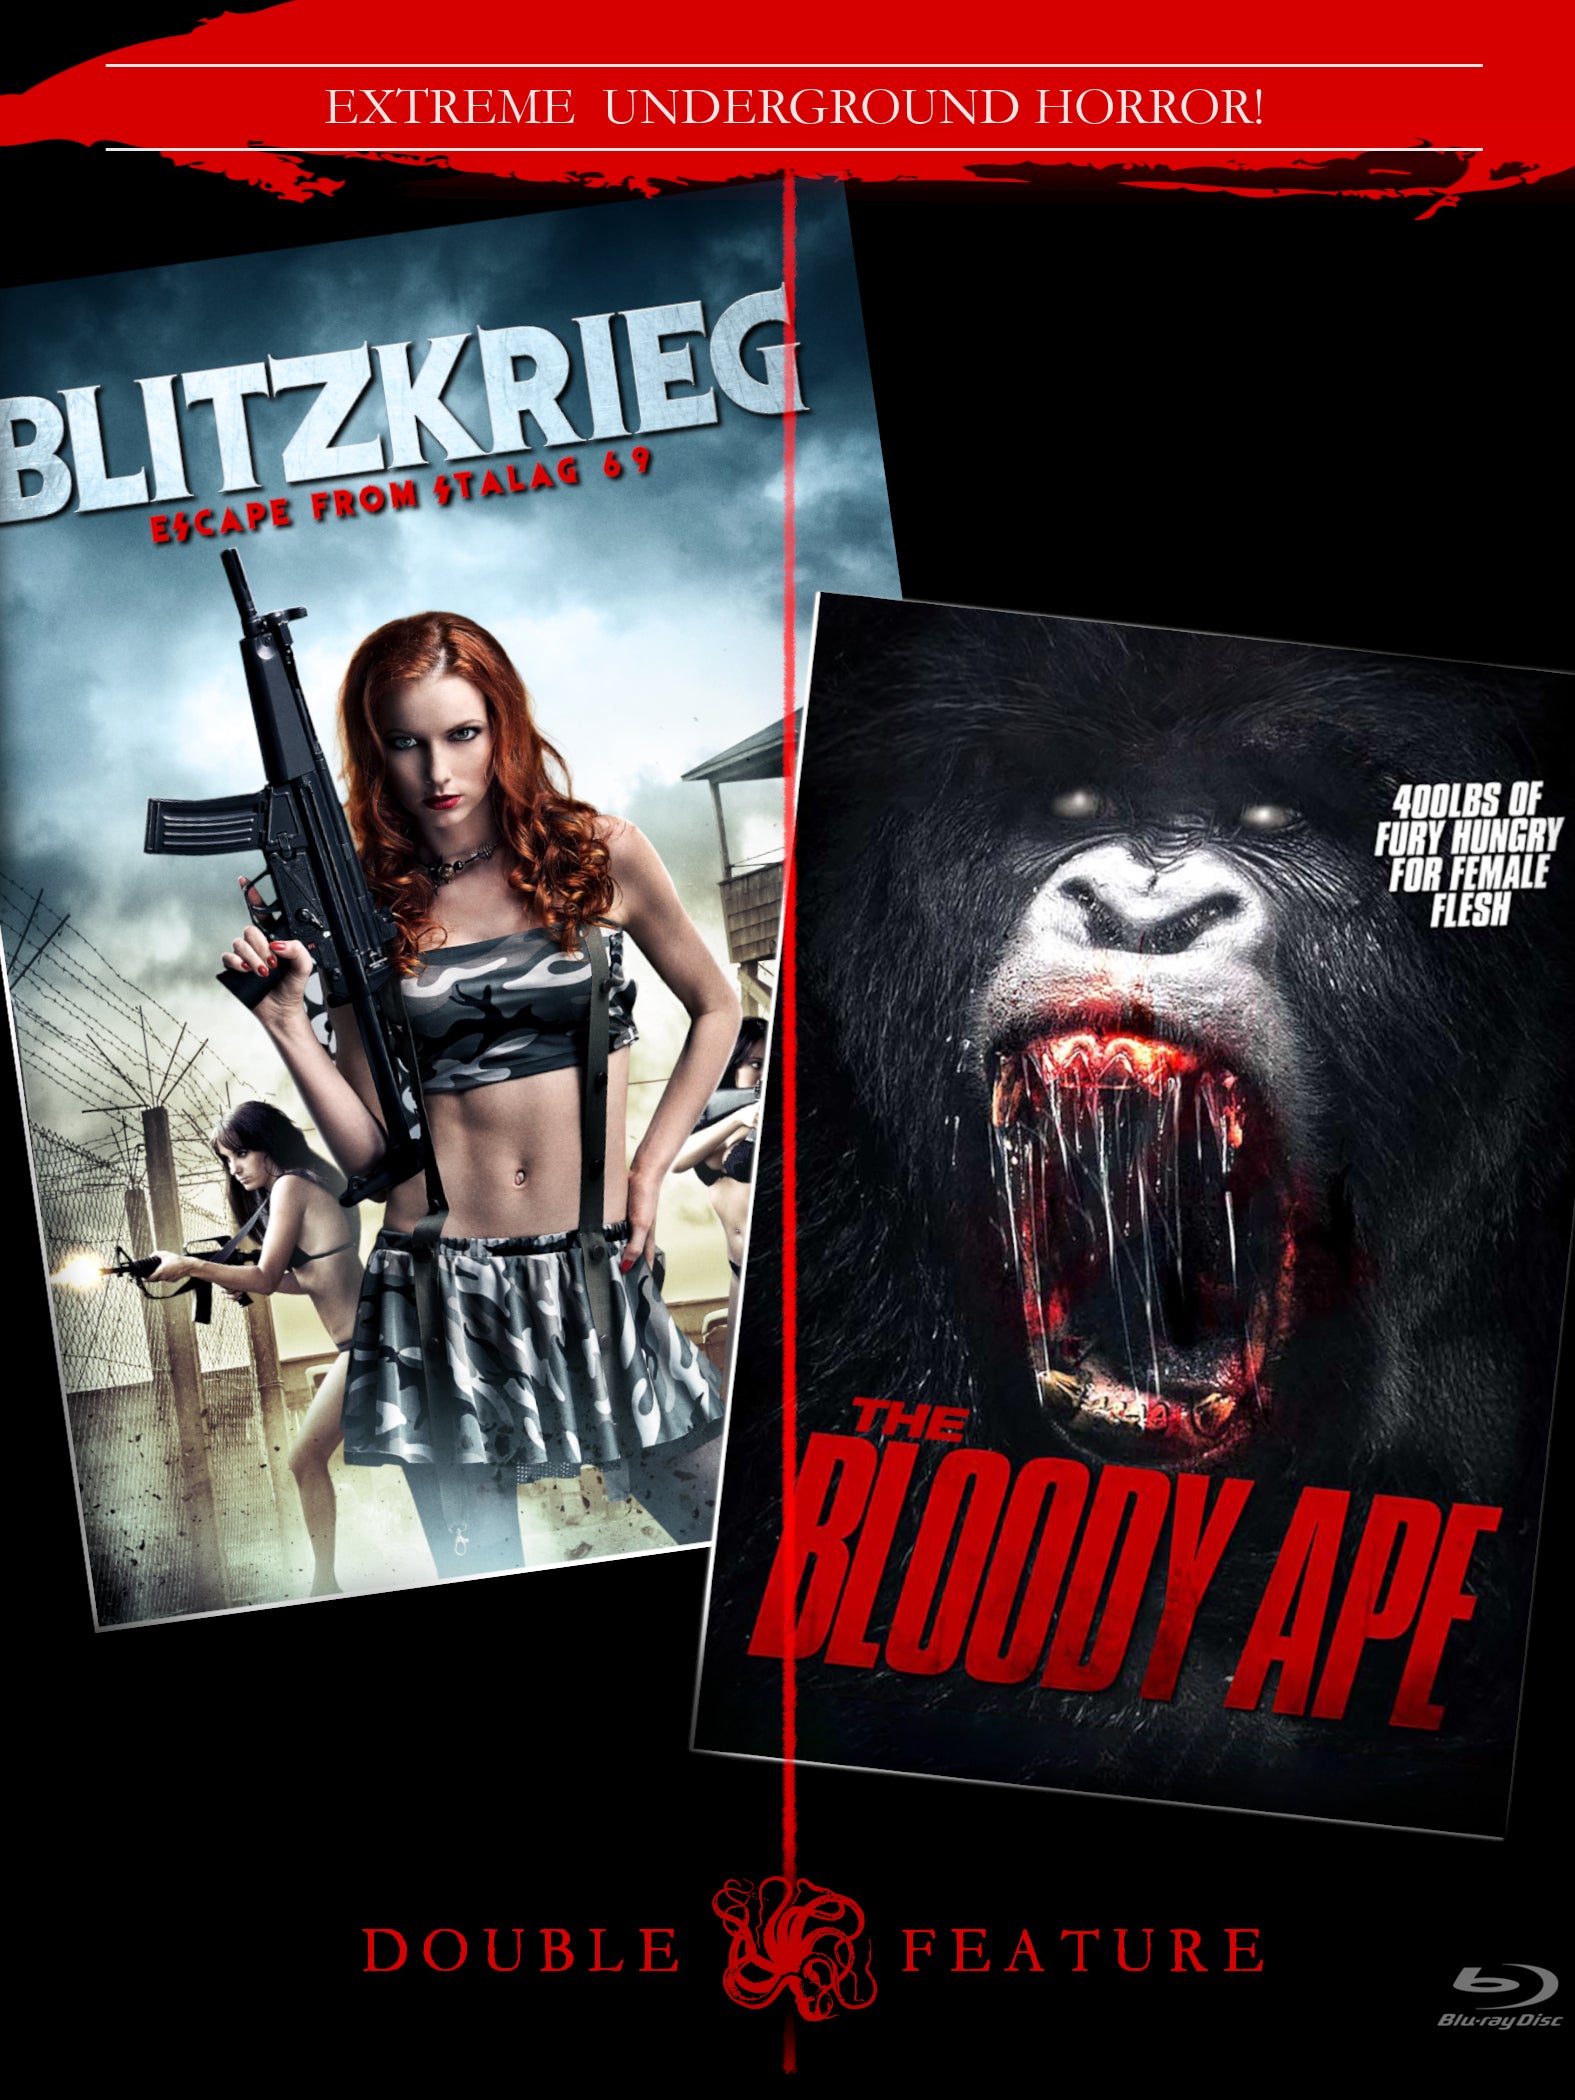 BLITZKRIEG: ESCAPE FROM STALAG 17 / THE BLOODY APE BLU-RAY